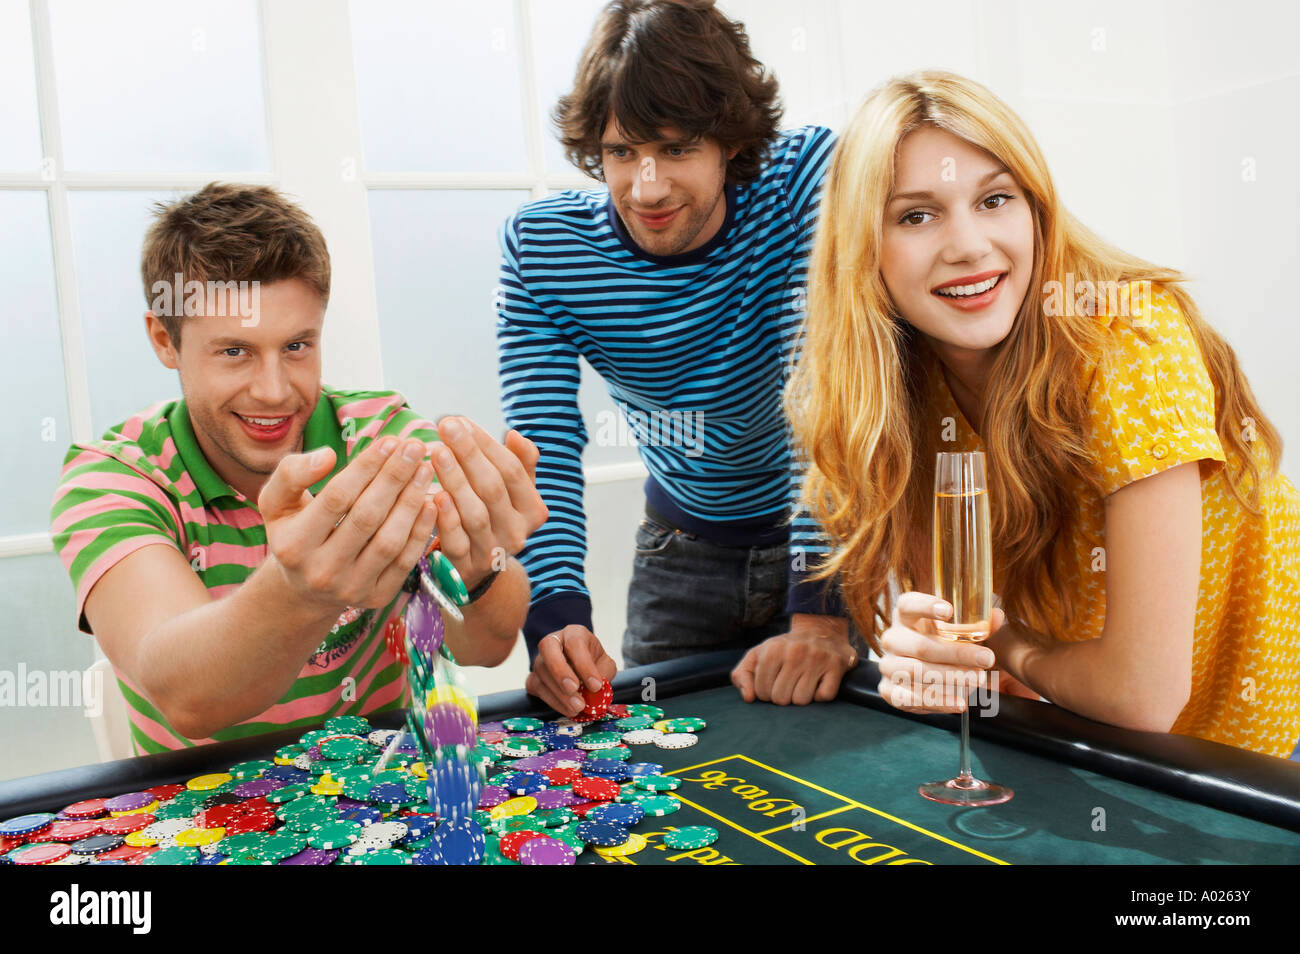 Young man with friends at roulette table playing with chips, portrait Stock Photo